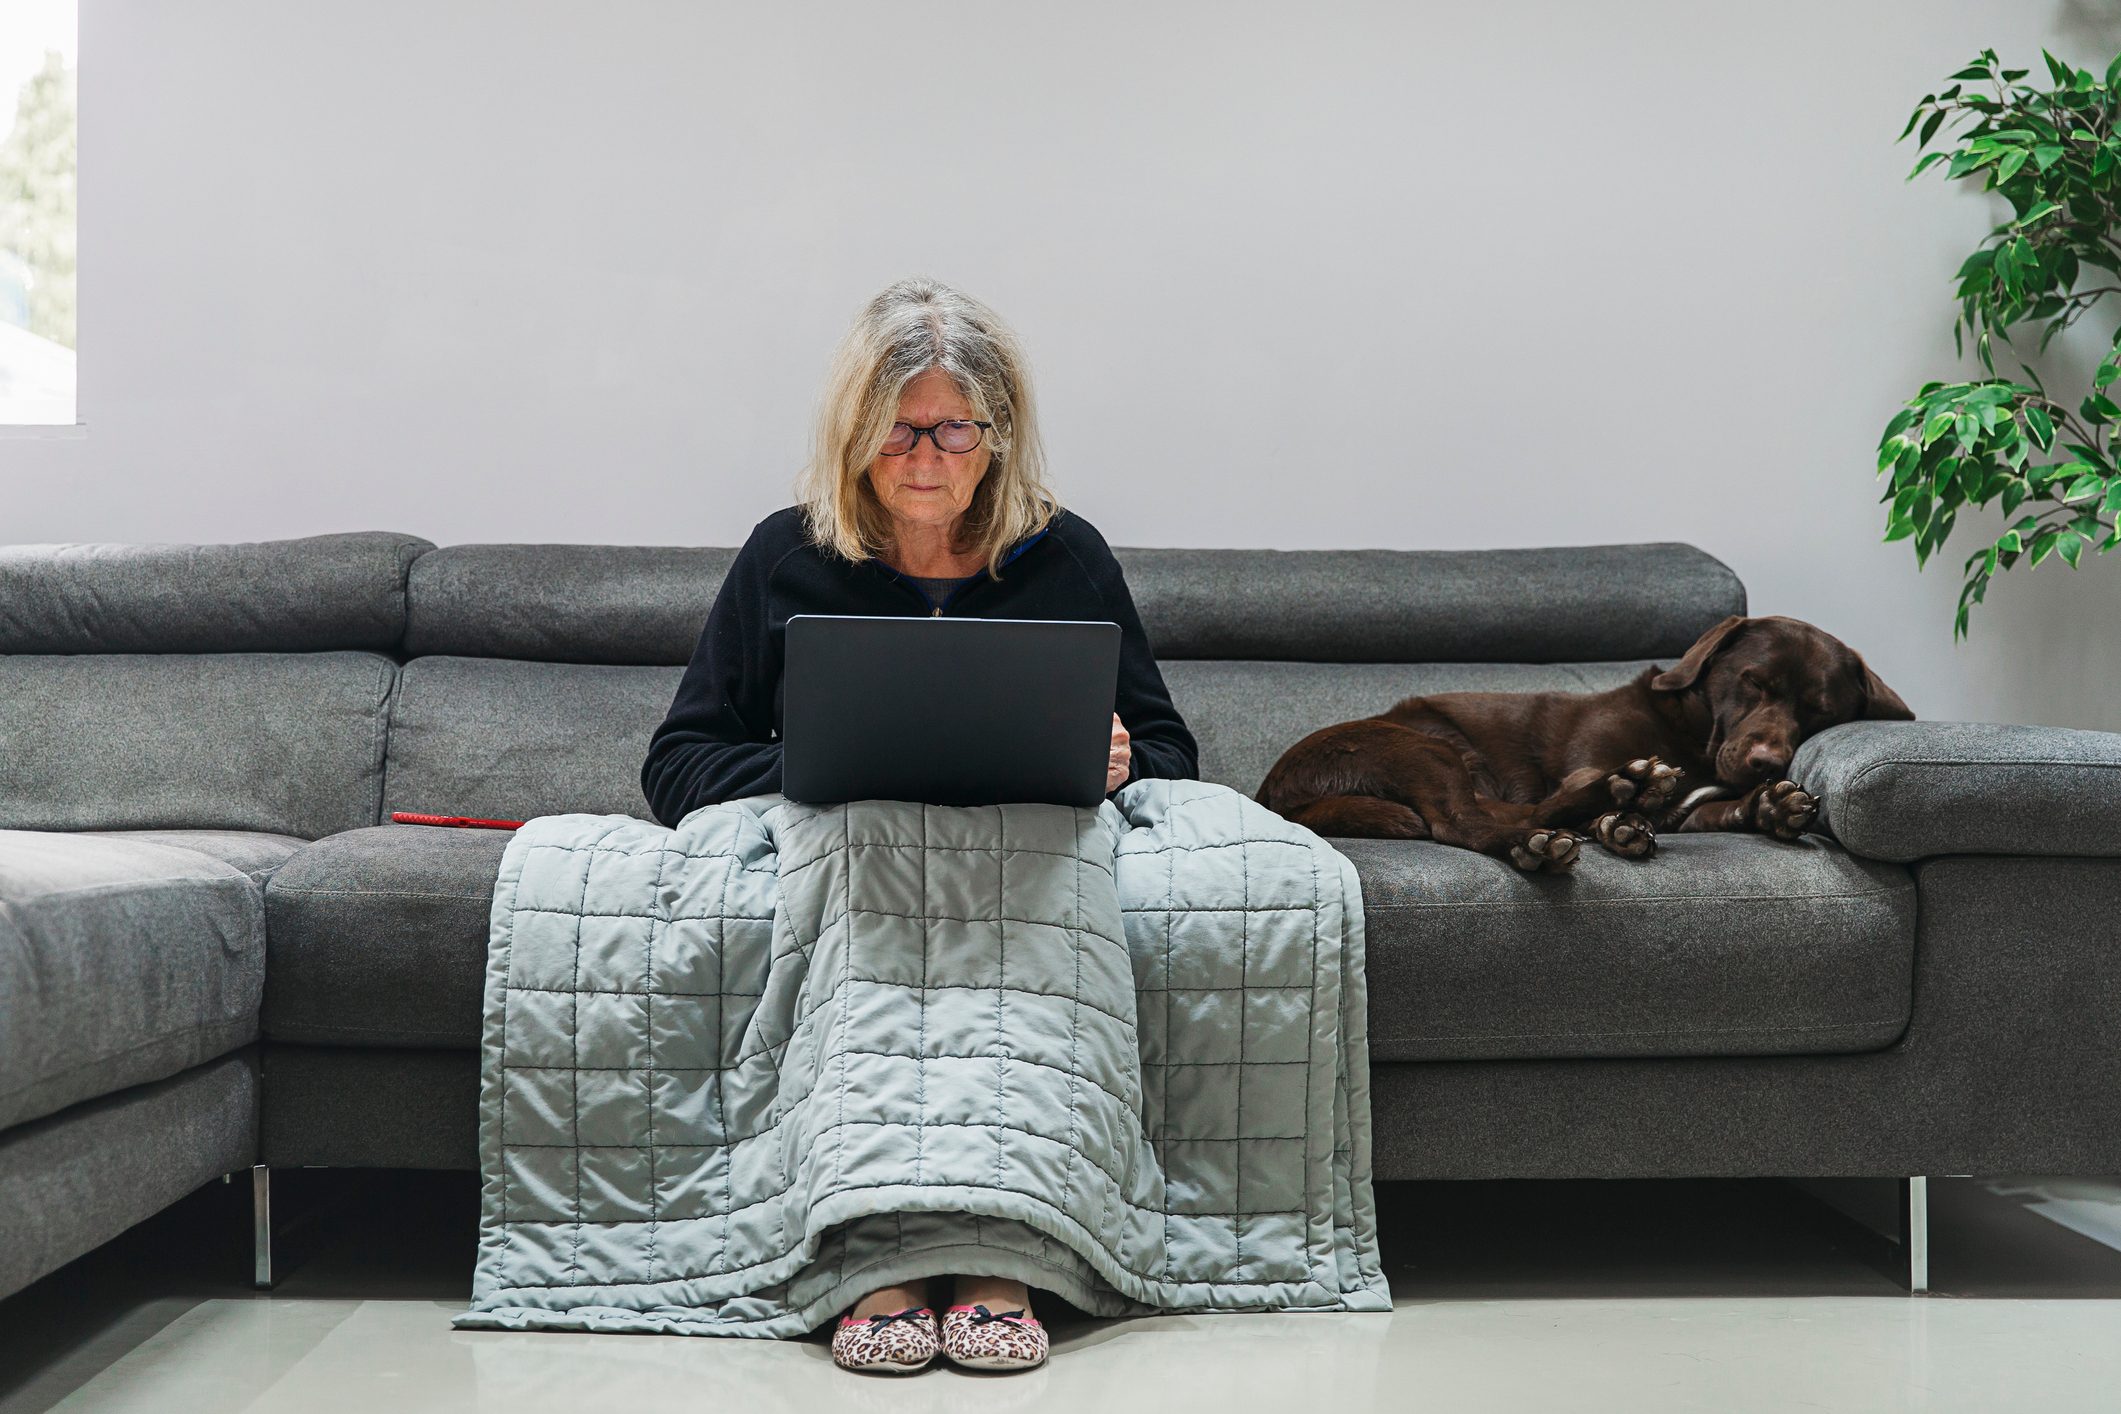 Senior lady using laptop on the sofa. Her pet dog is next to her